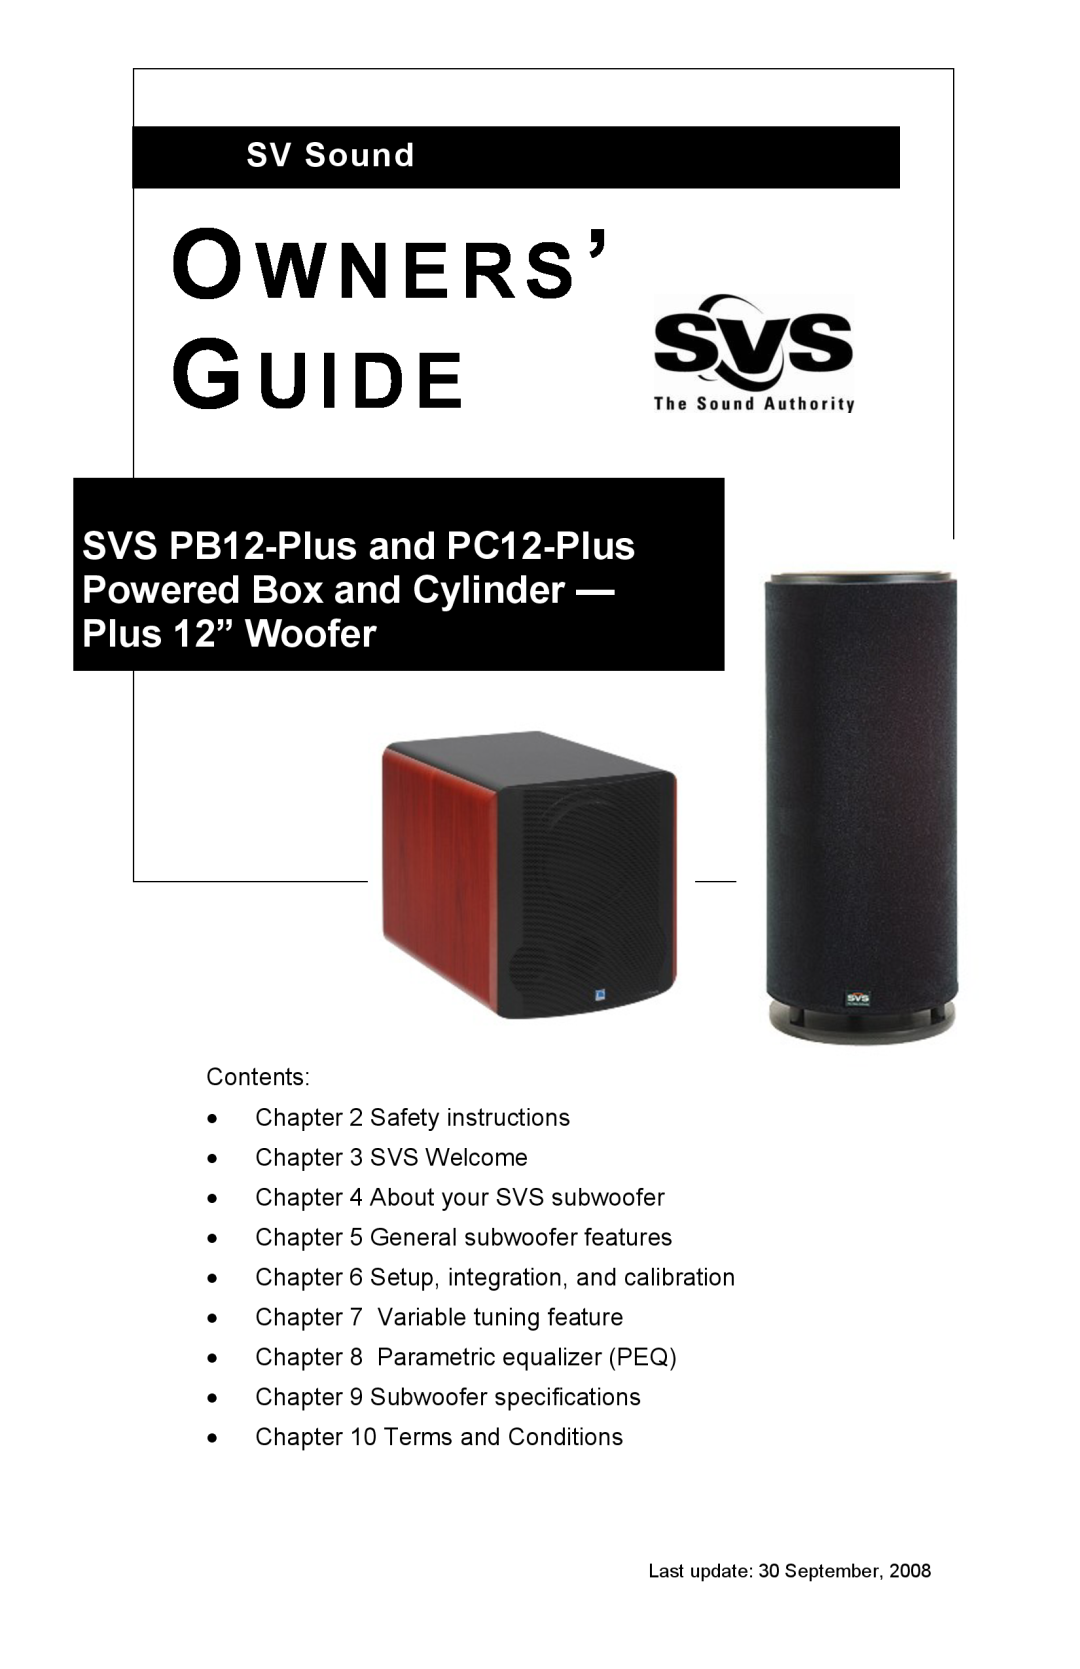 SV Sound specifications O W N E R S ’ G U I D E, SVS PB12-Plusand PC12-Plus, Powered Box and Cylinder - Plus 12” Woofer 